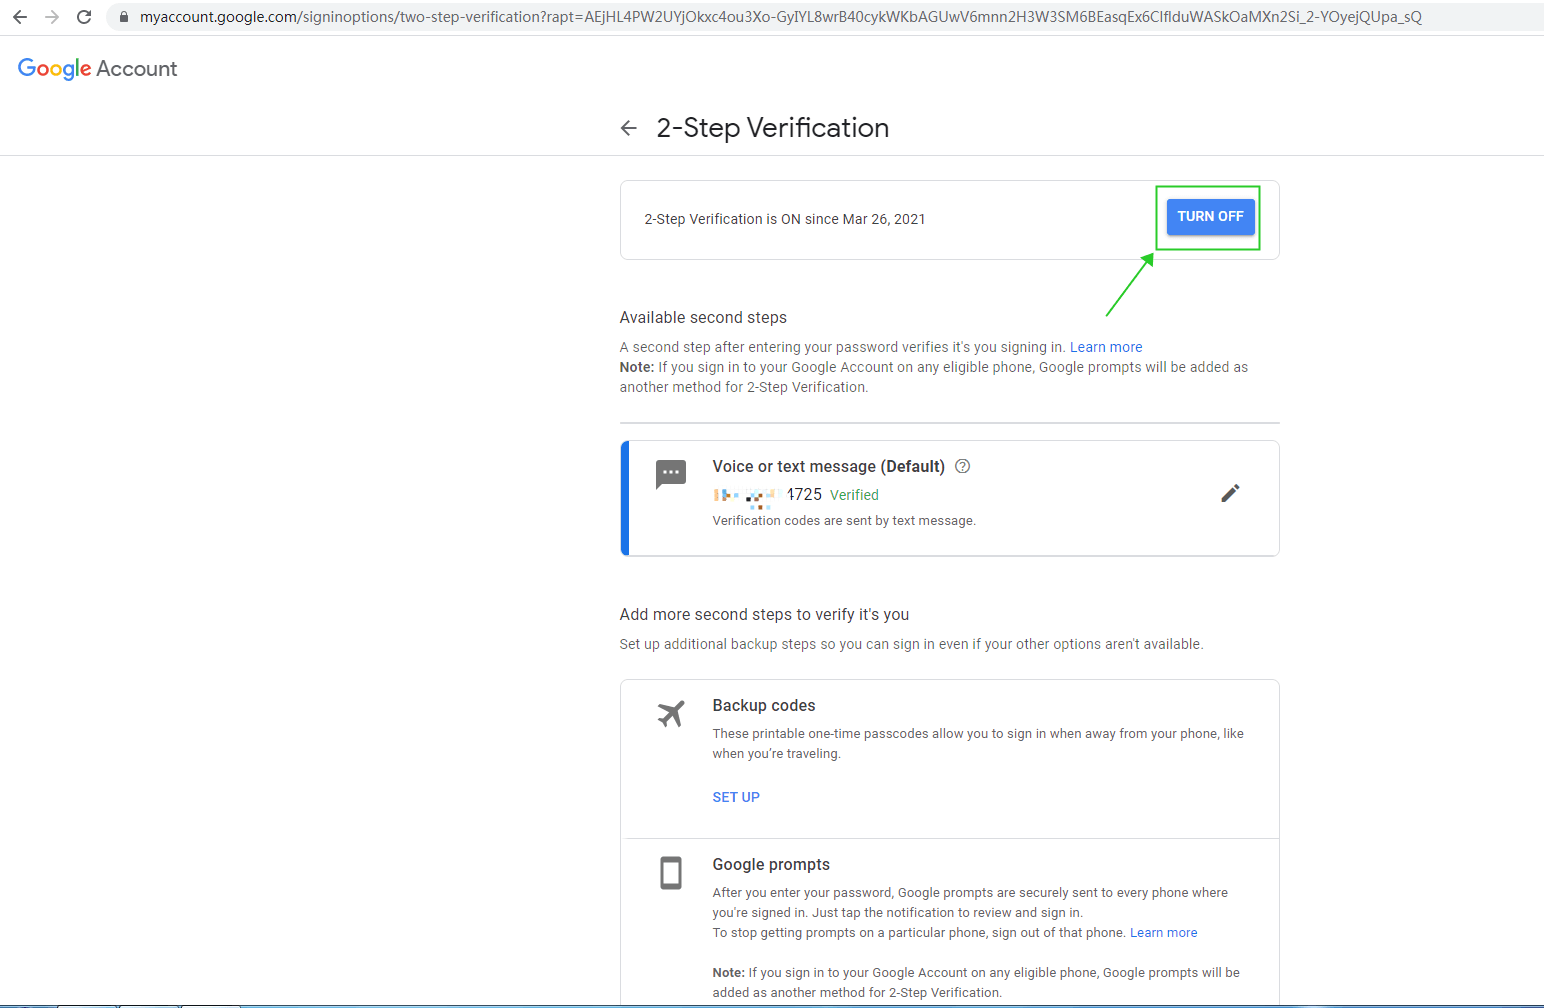 Turn off 2-Step Verification for Google Account